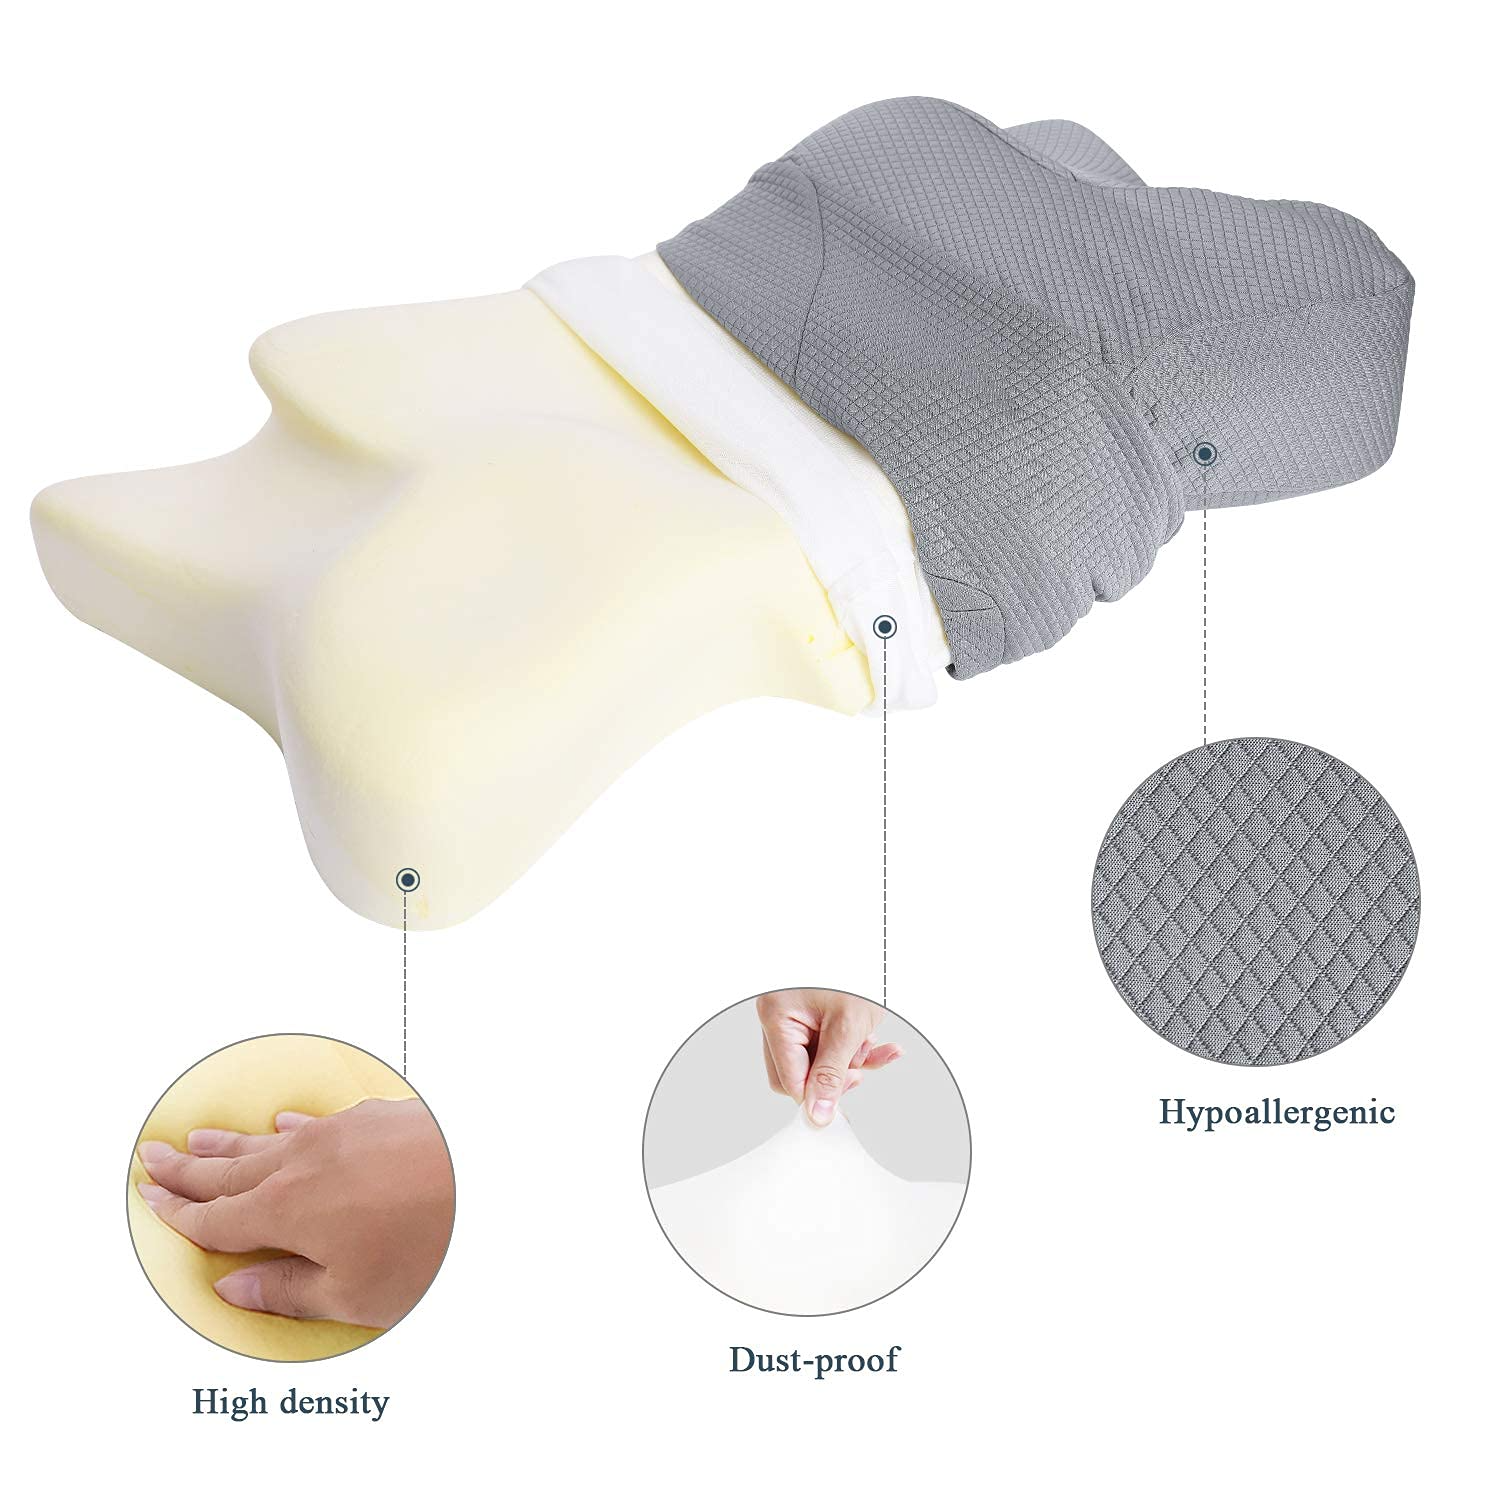 Marnur Cervical Pillow Memory Foam Orthopedic Pillow for Neck Pain Sleeping Side & Back & Stomach Sleeper with White Pillowcase